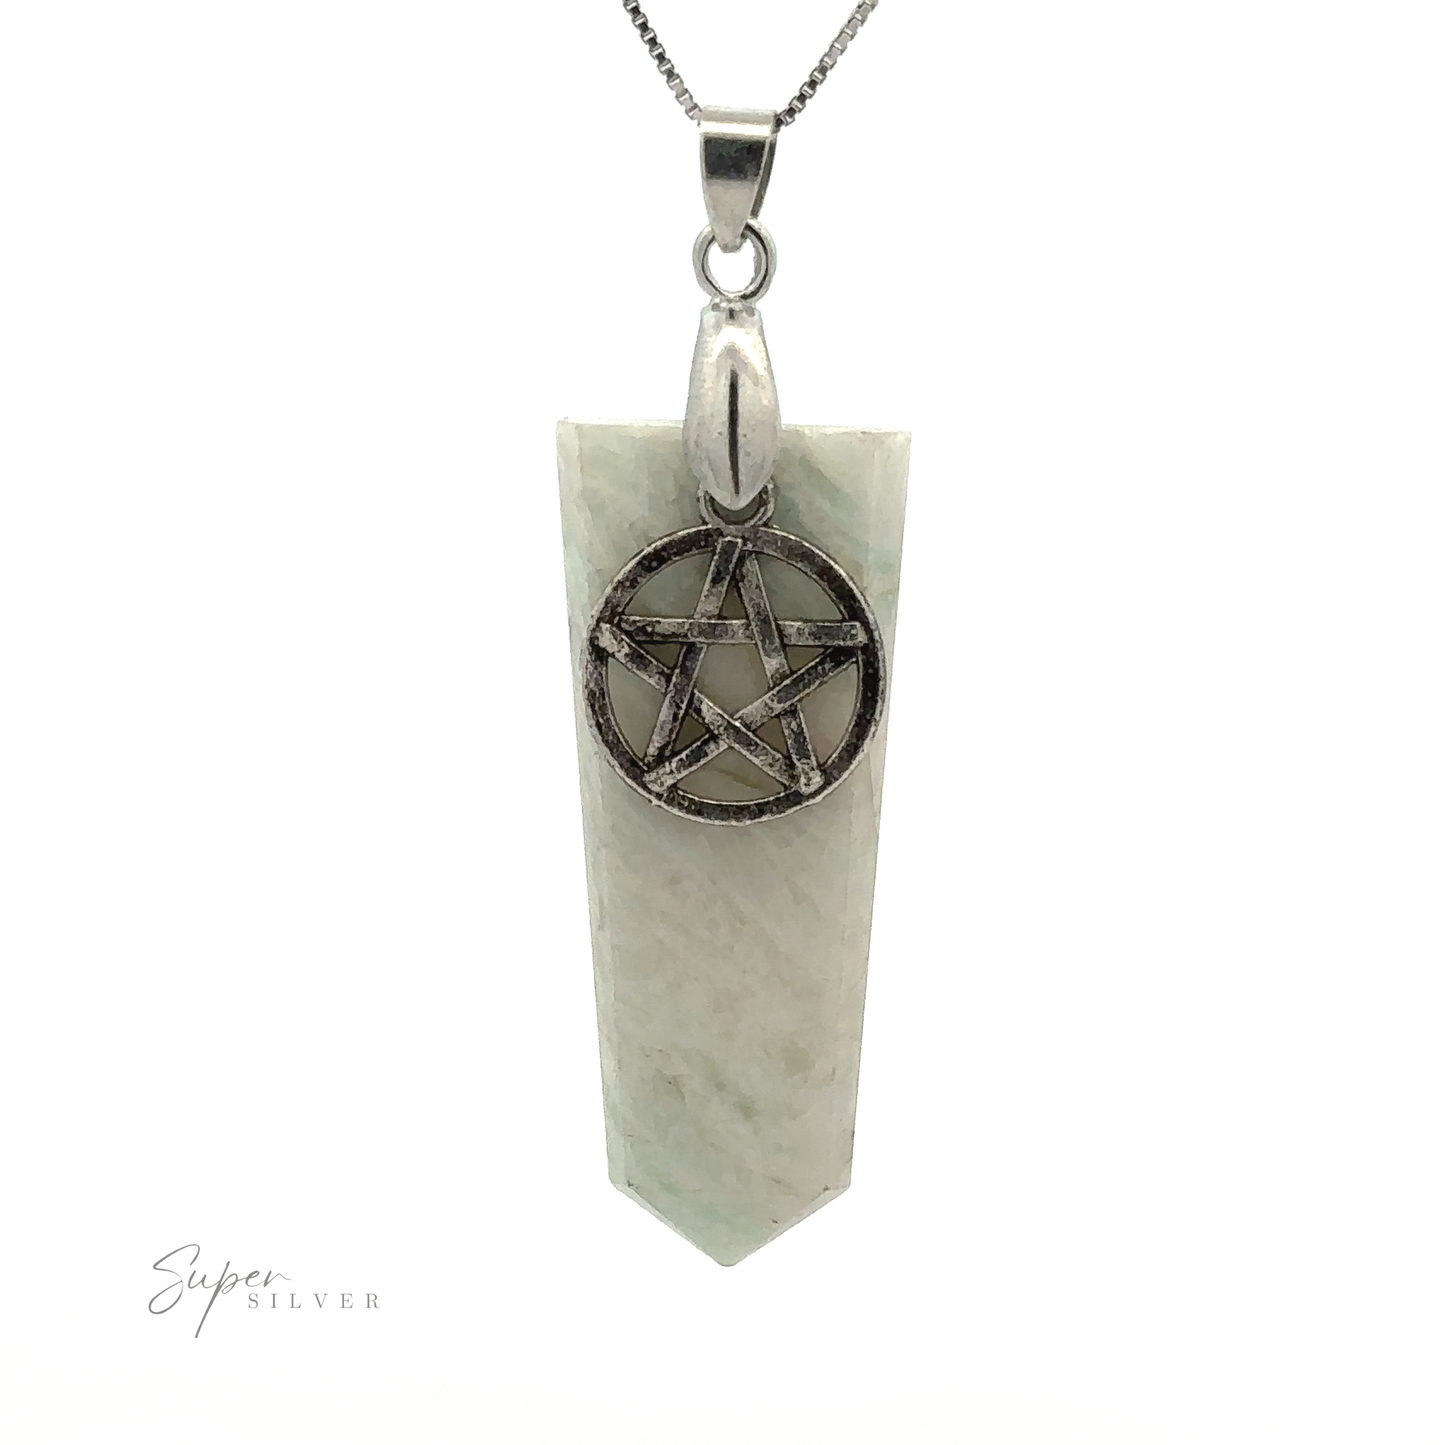 
                  
                    A Pentagram Stone Slab Pendant featuring a pendant with a pointed, marble-like gemstone slab. Attached to the stone is a silver pentagram charm. The image includes the text "Super Silver" in the bottom left corner.
                  
                